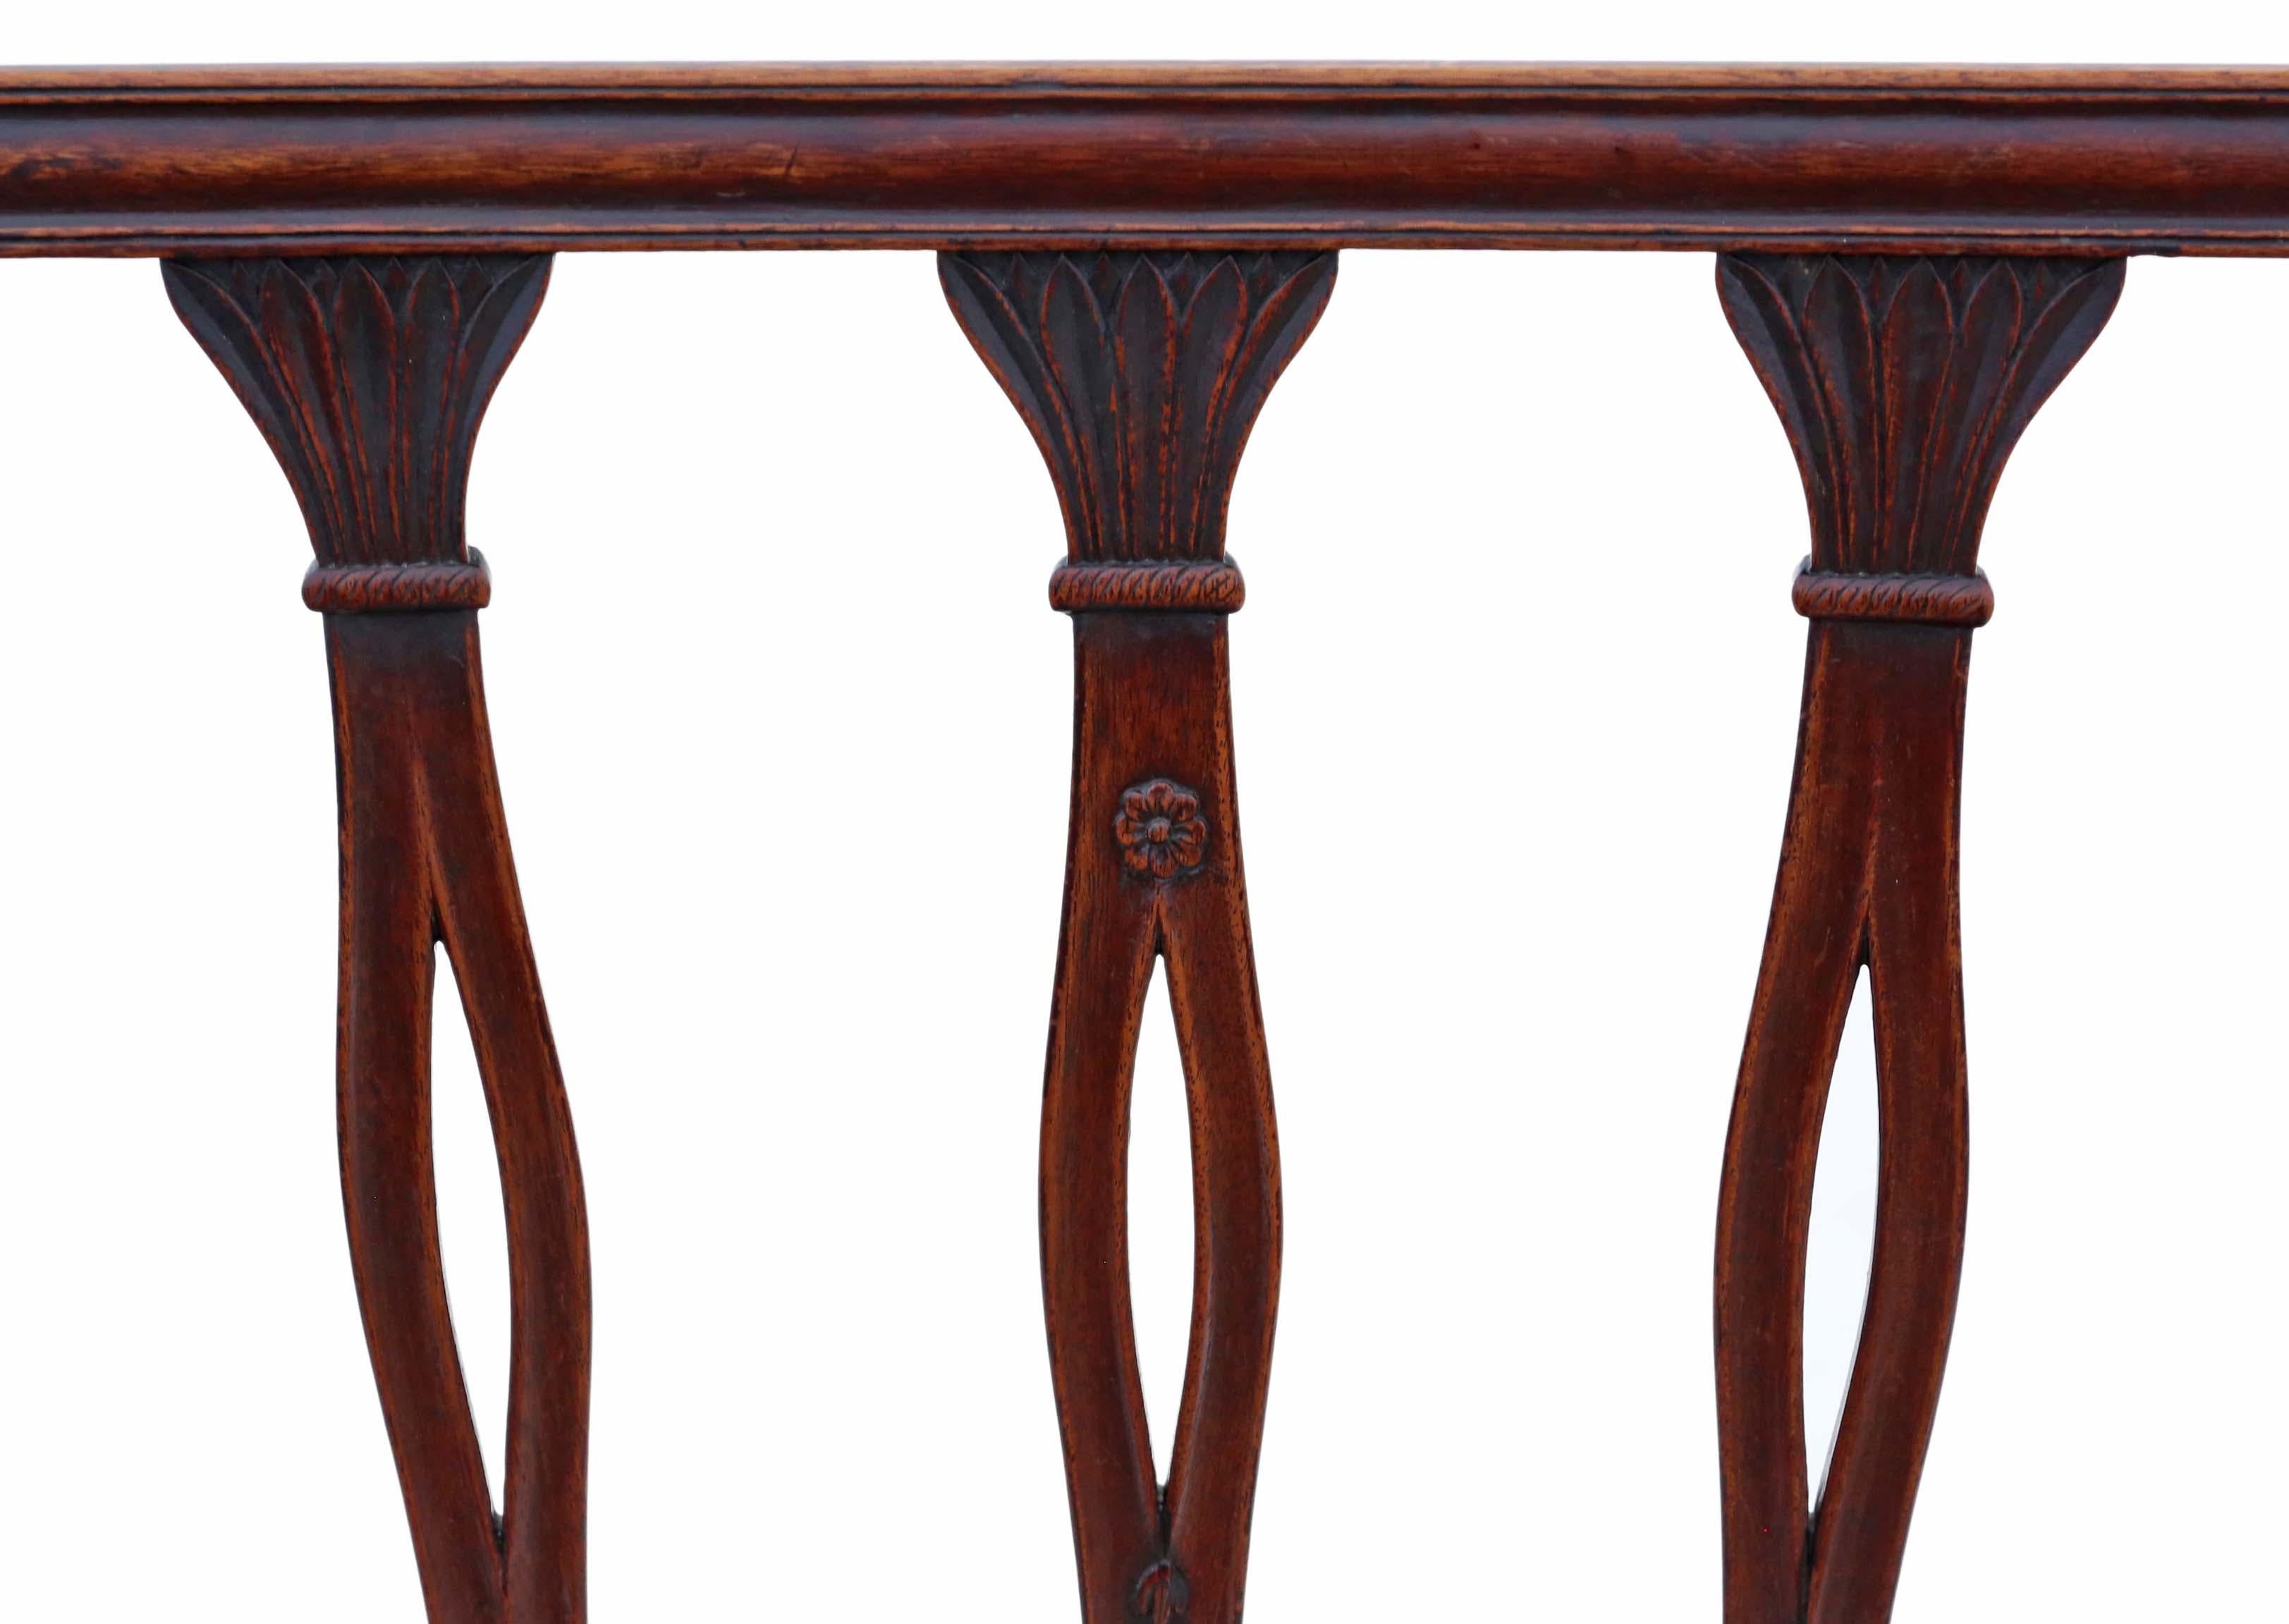 18th Century Mahogany Dining Chairs: Set of 8 (6 + 2), Antique Quality, C1820 For Sale 1